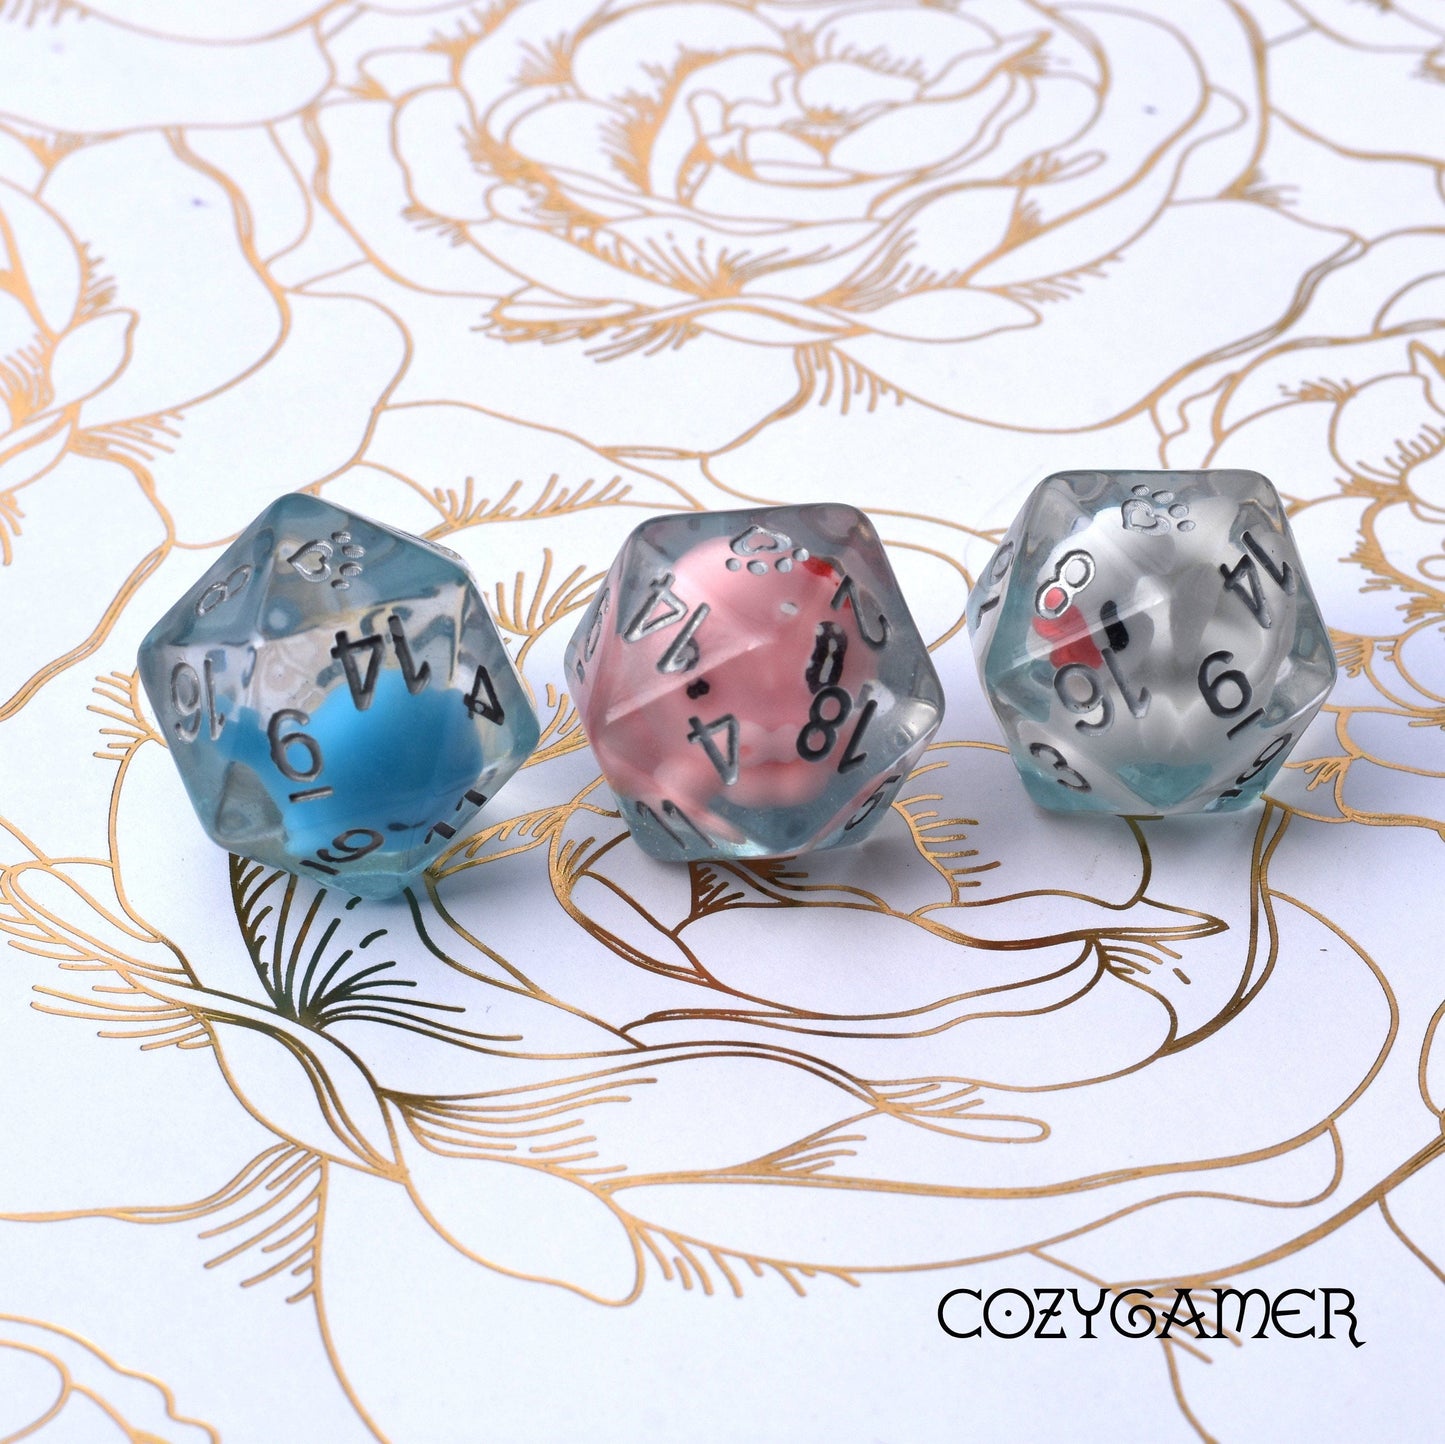 Water Creatures D20s. Single Large D20 with Octopus, Whale, or White Duck